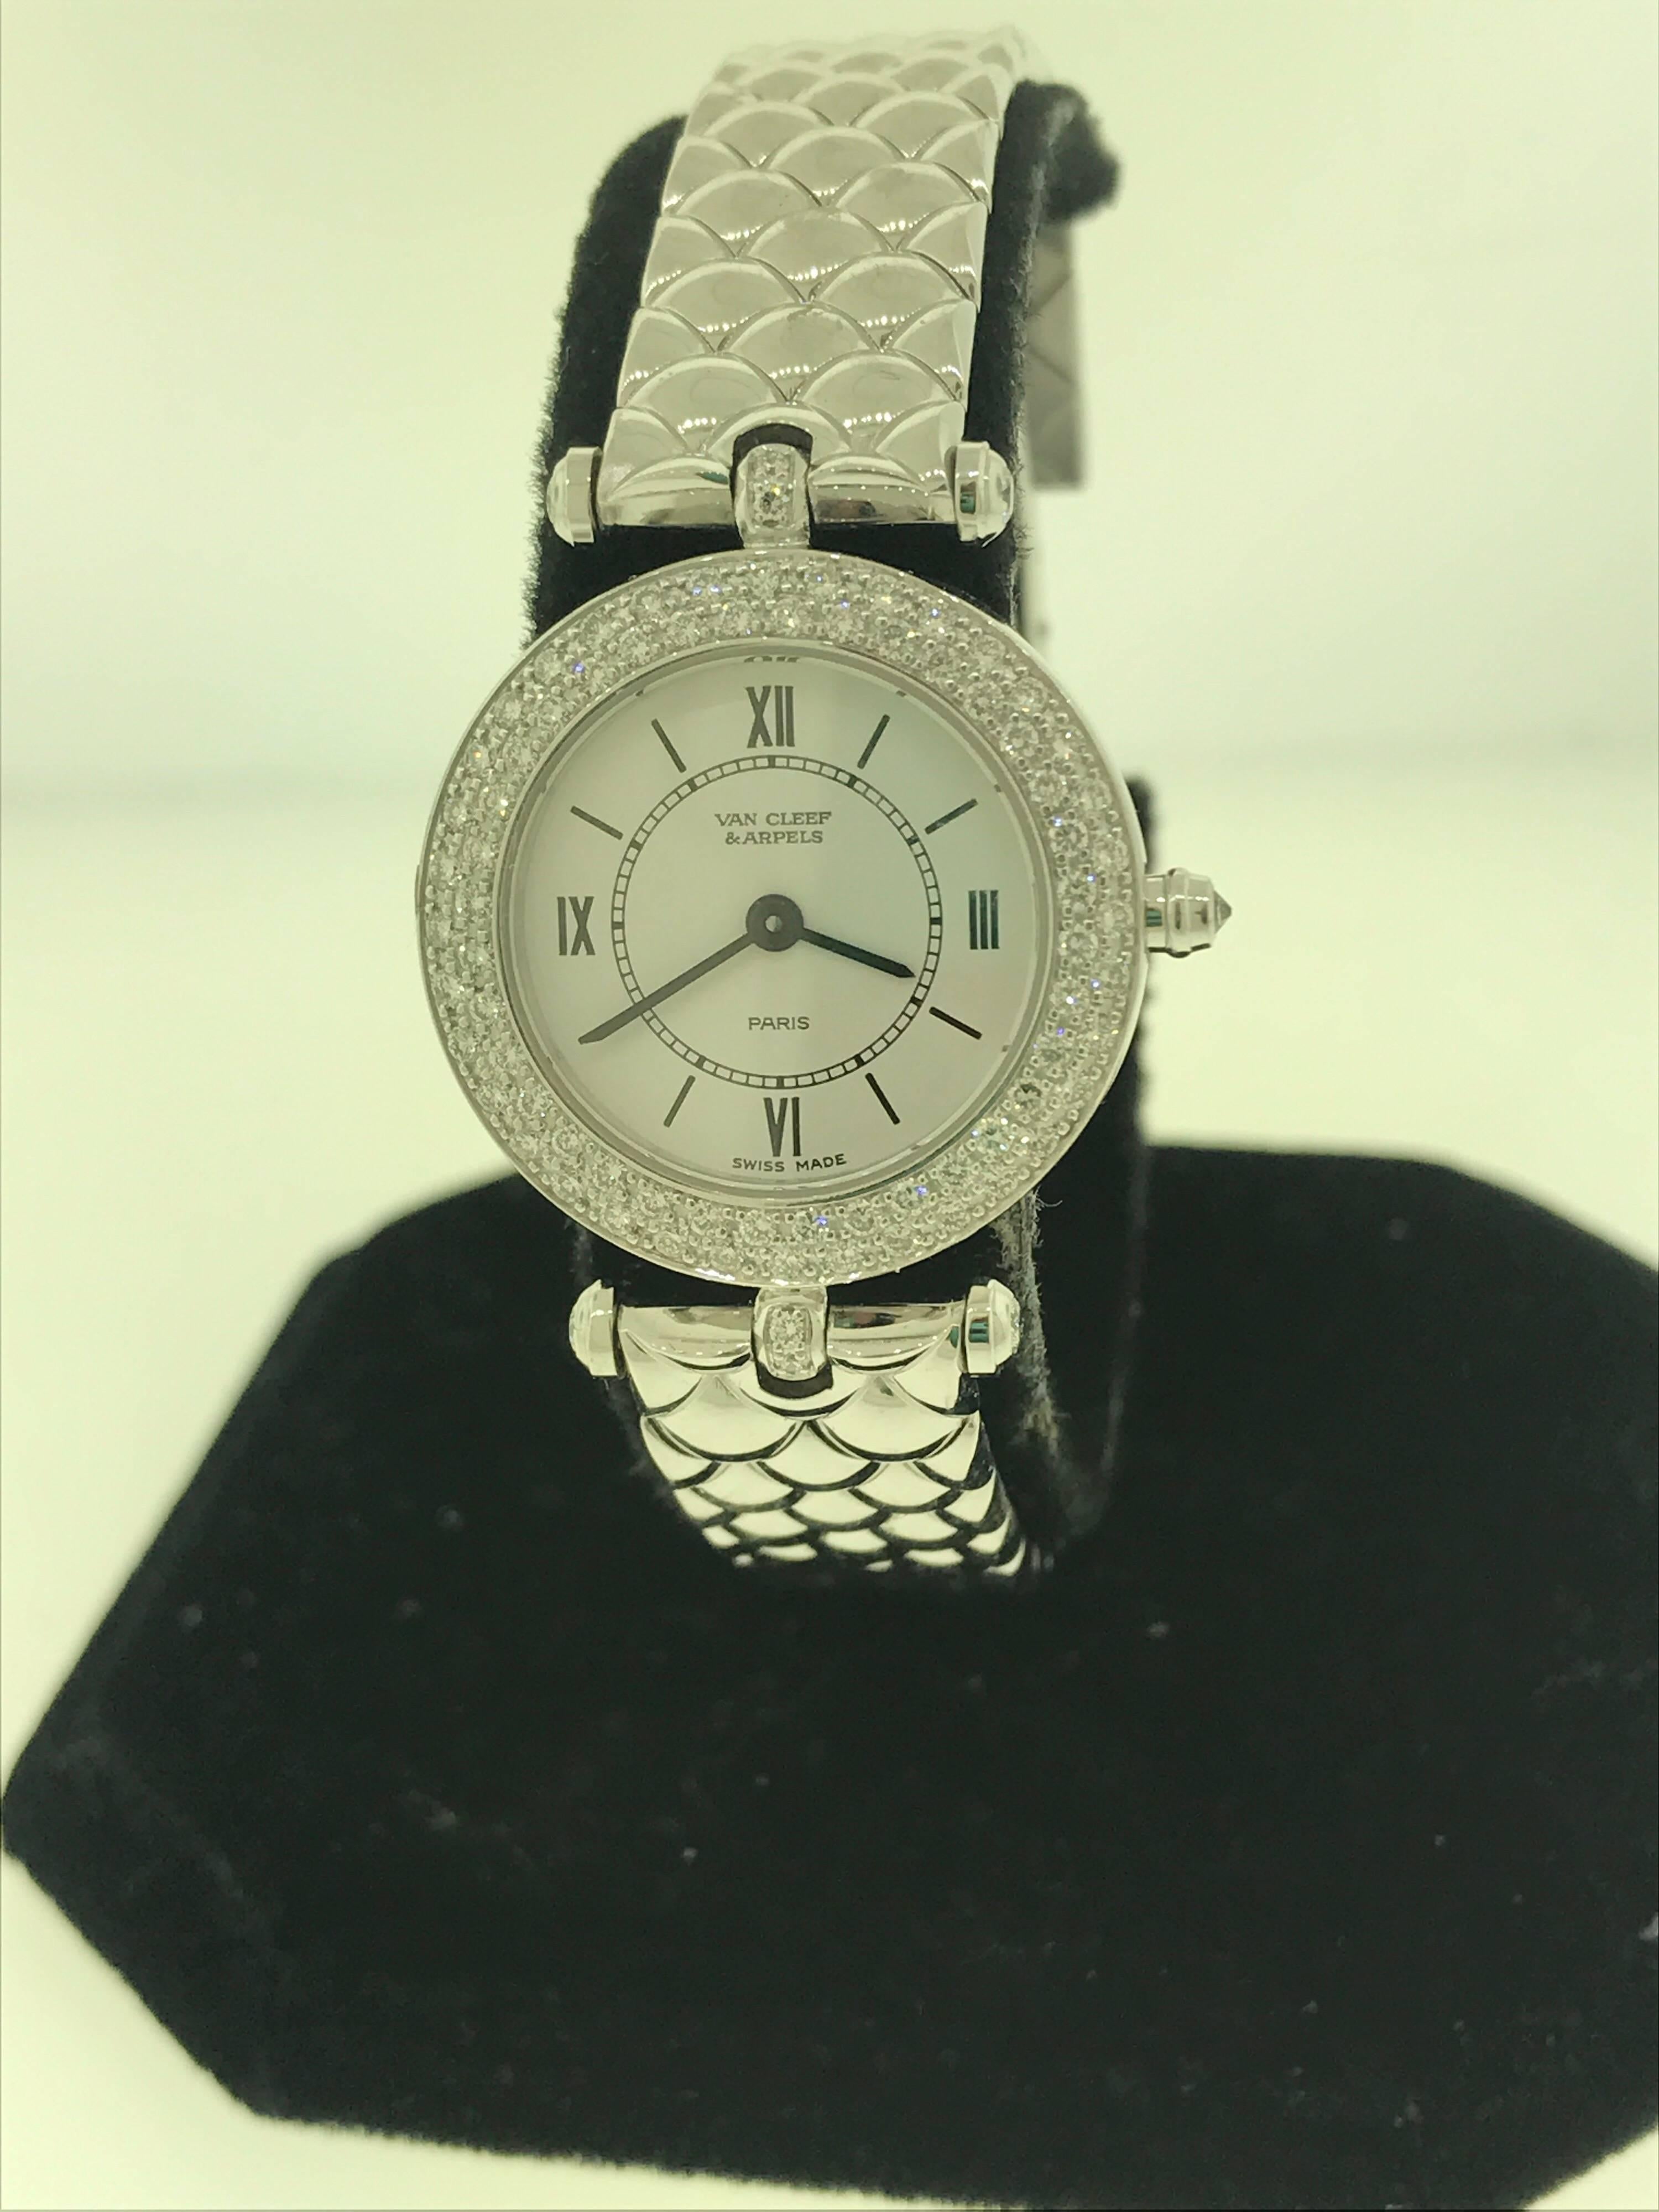 Van Cleef & Arpels Classique Ladies Watch

Model Number: 

100% Authentic

Pre owned restored to be in perfectly working & pristine condition

Comes with a generic watch box

18 Karat White Gold Case & Bracelet

Bezel set with 2 rows of